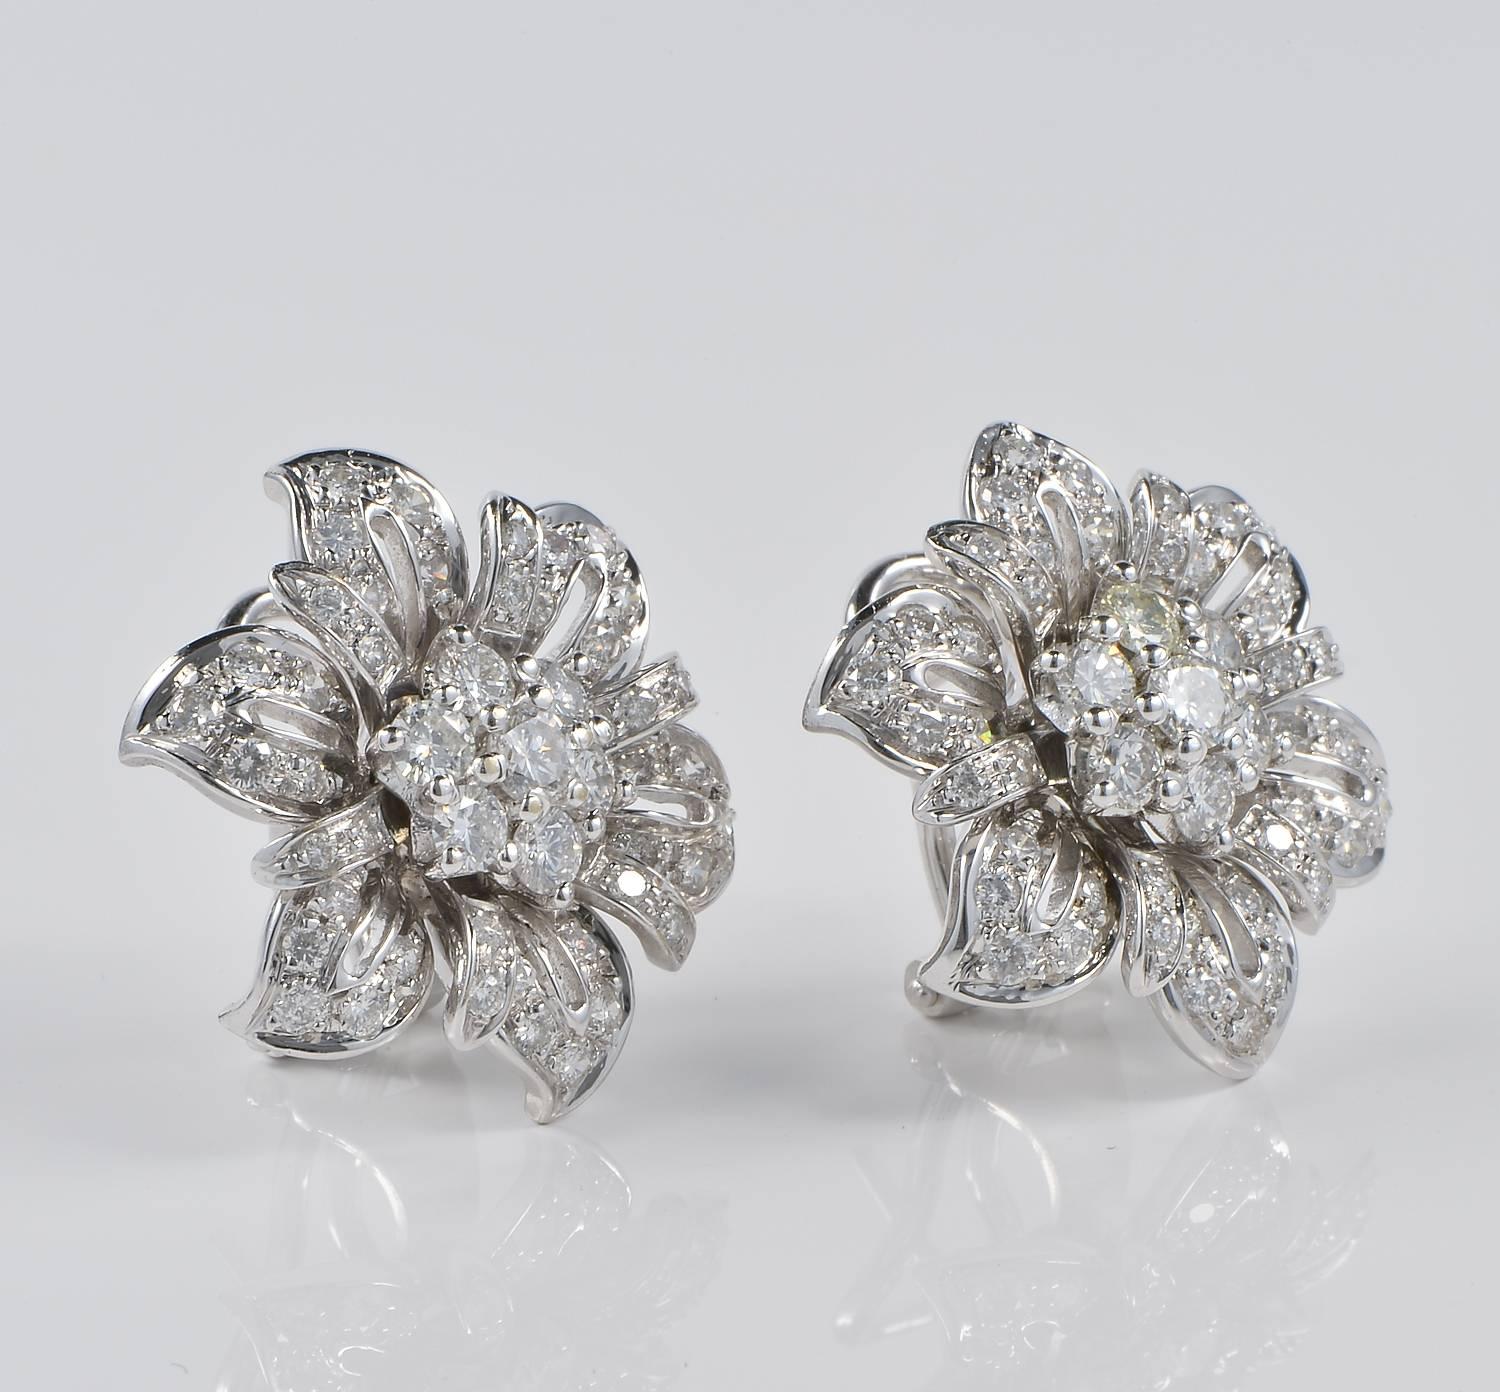 Terrific in design and high quality Diamonds. Vintage pair of earrings superior in all.
An amazing flower of multidimensional design overwhelmed by best Diamond sparkle.
What best to have on ears. Holding 2.34 Ct of Diamonds on them G